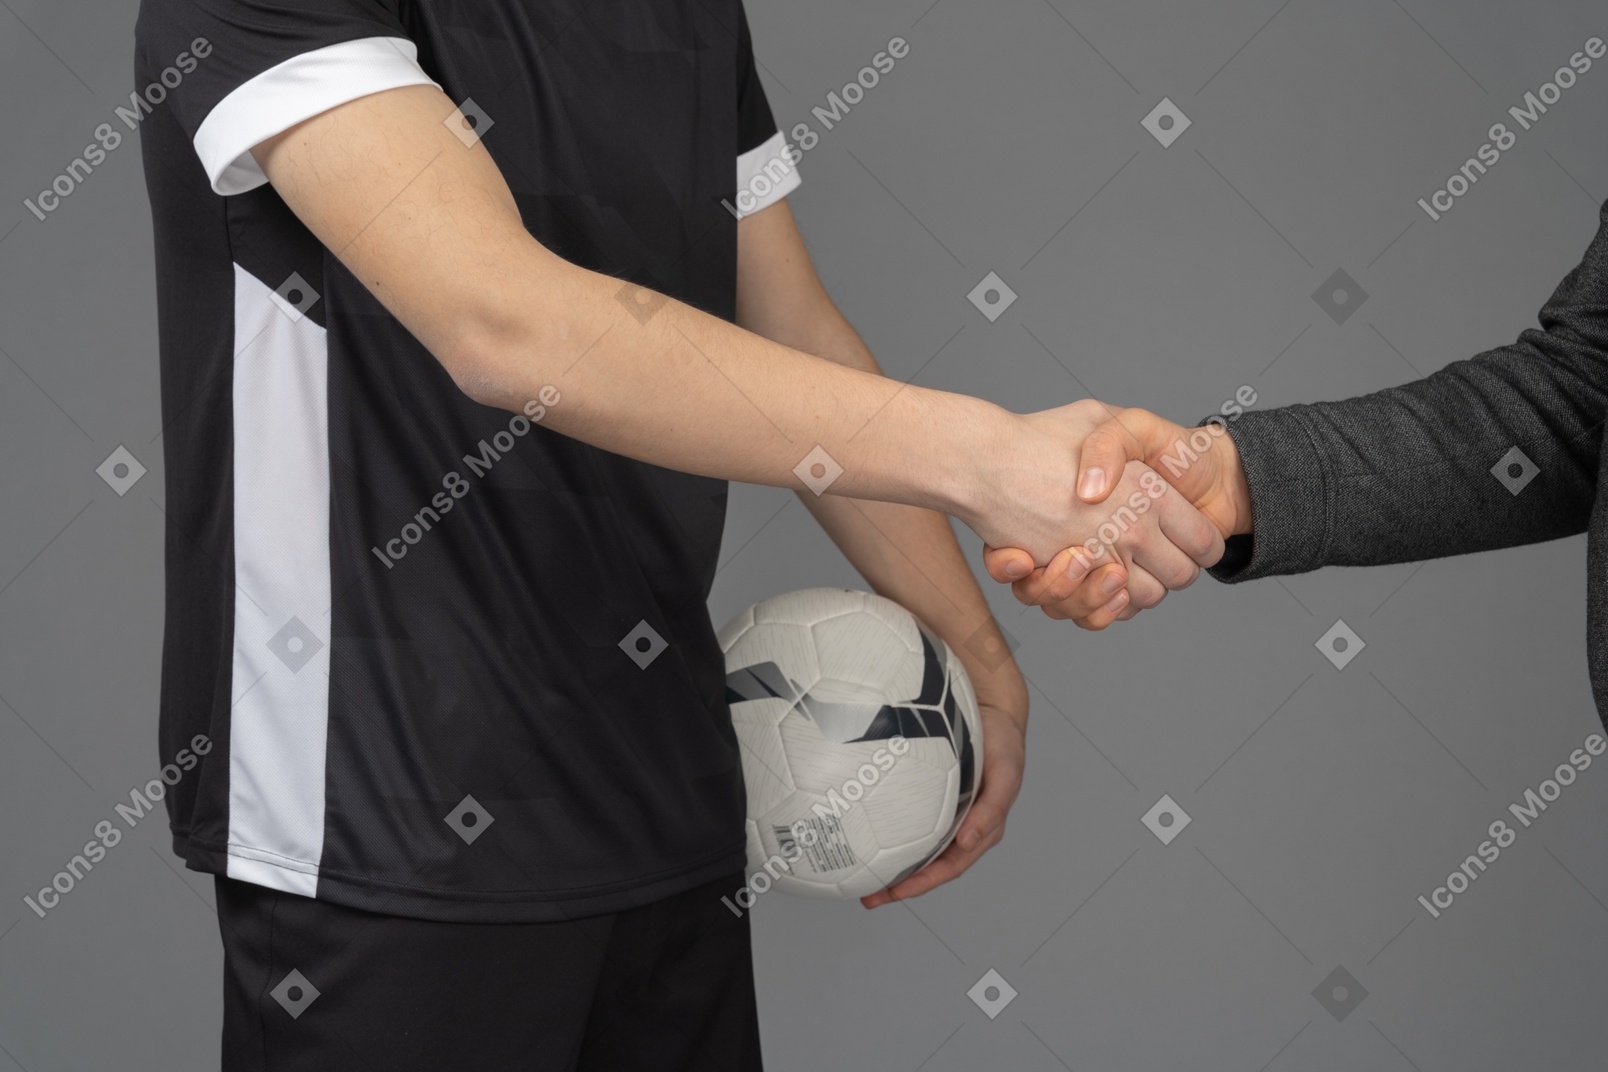 Football player shaking hands with someone